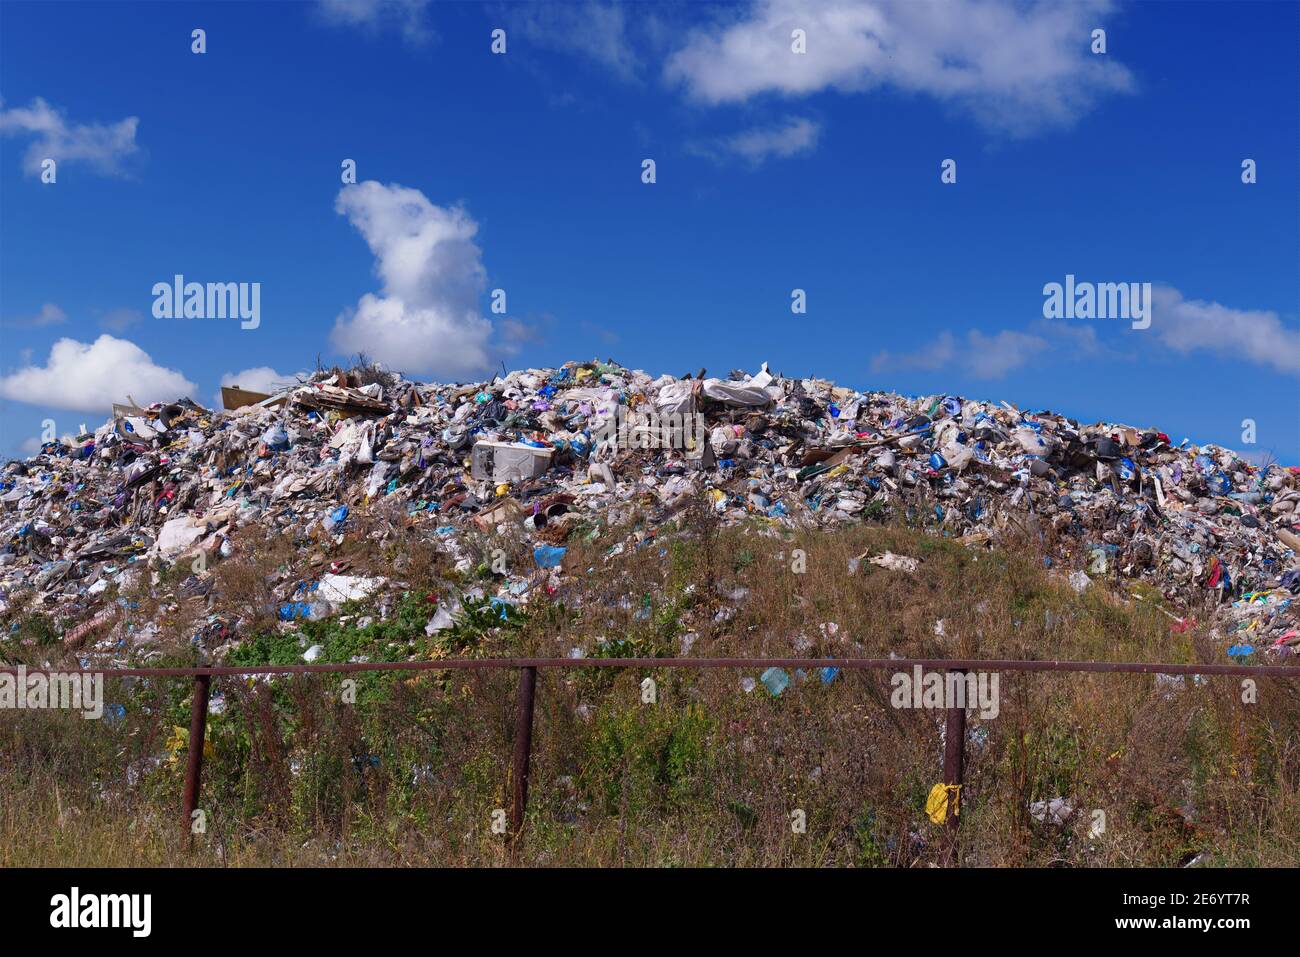 Storage of waste in the open air. Dump of unsorted waste. Ecological problems. Contamination of the environment. Stock Photo